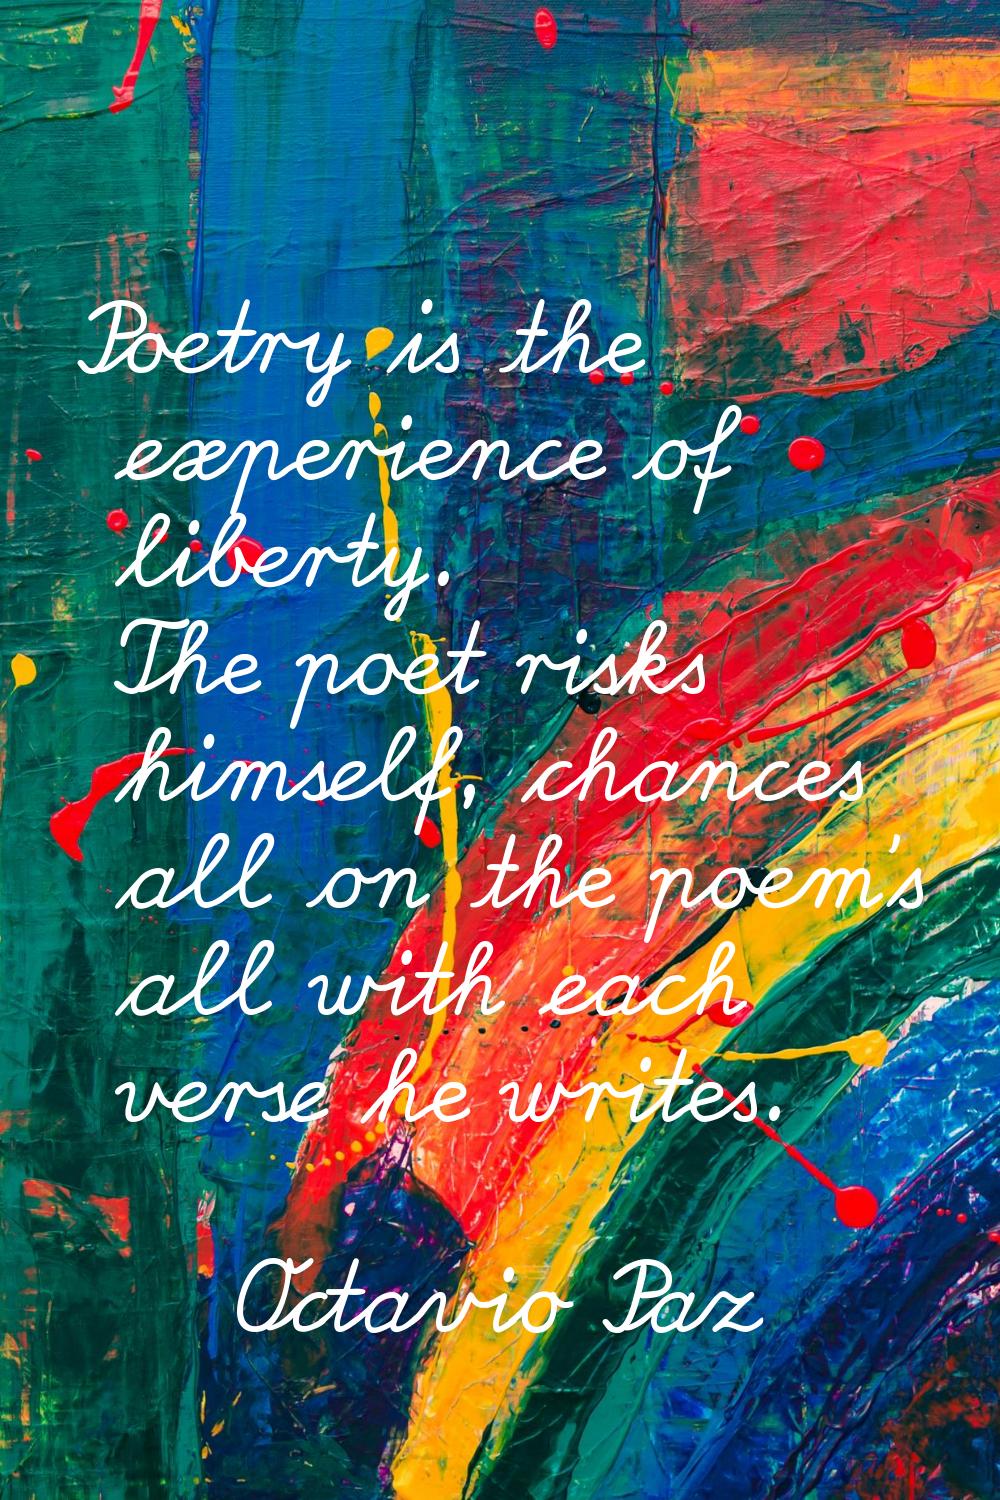 Poetry is the experience of liberty. The poet risks himself, chances all on the poem's all with eac